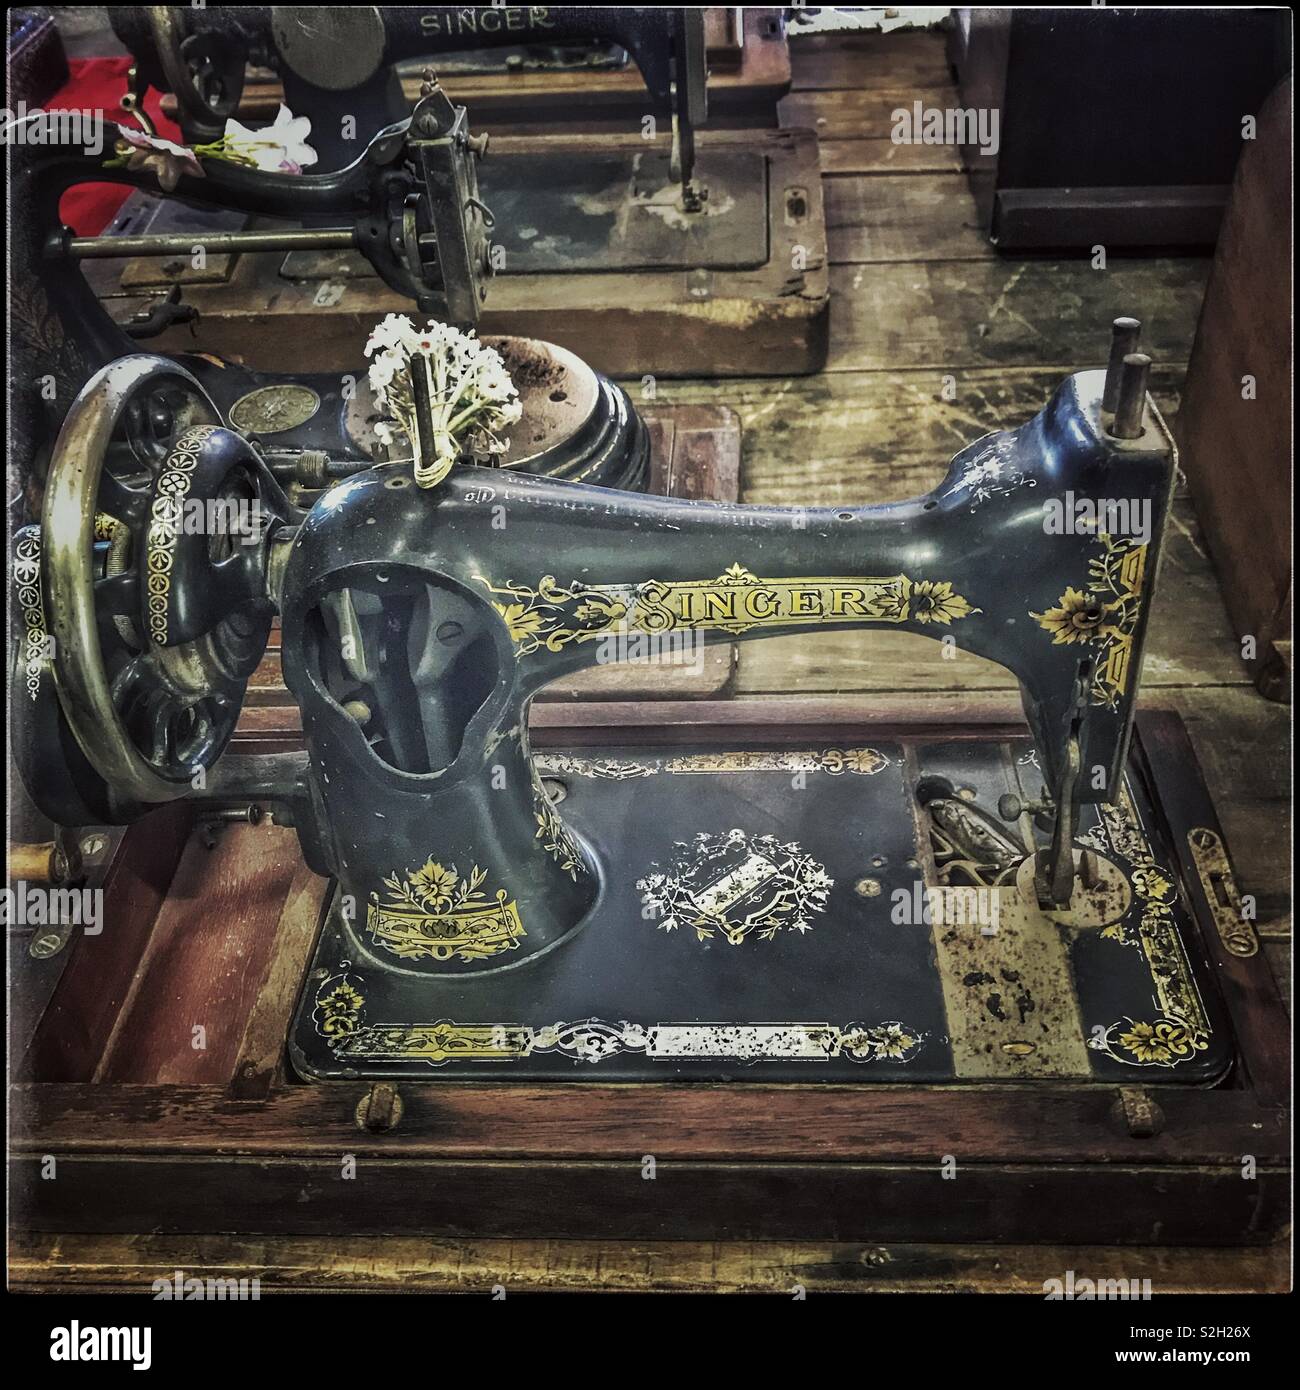 Antique Singer Sewing Machine High Resolution Stock Photography and Images  - Alamy